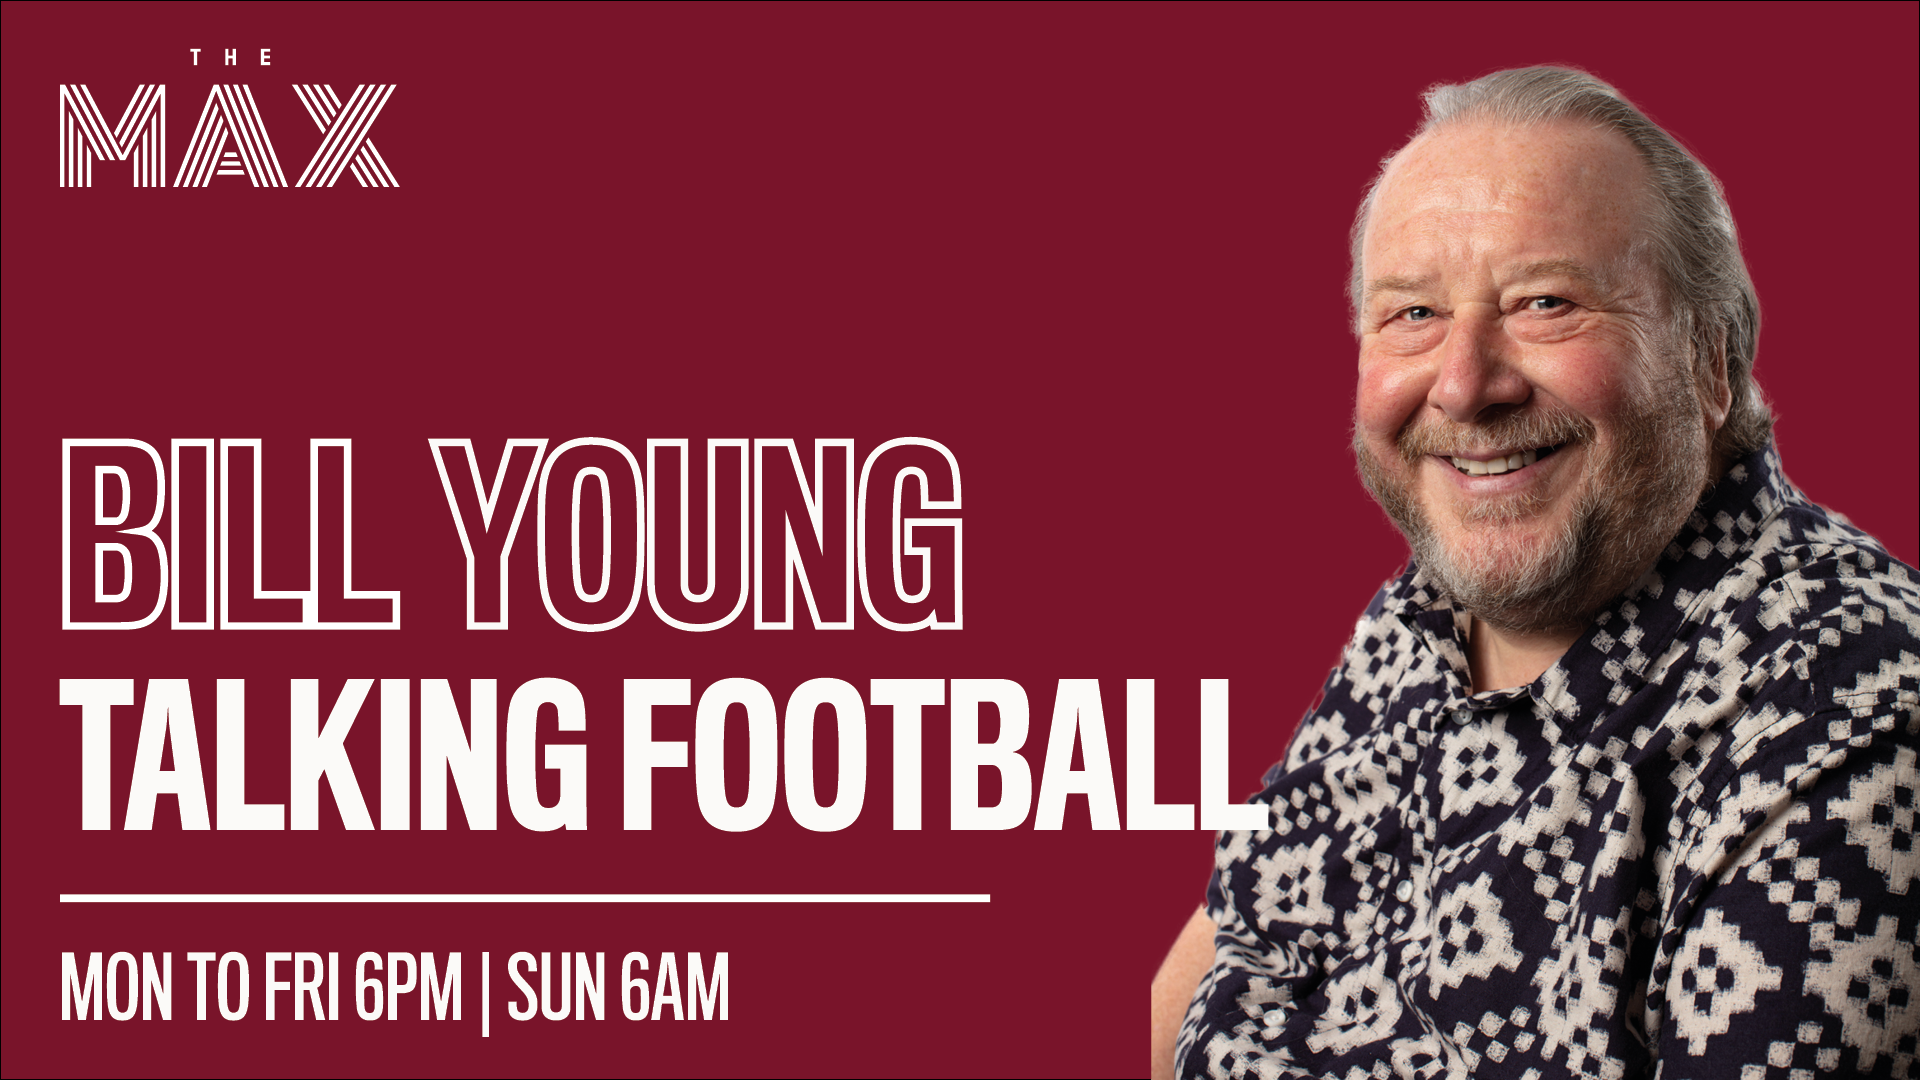 Talking Football with Bill Young - Wednesday 10 February